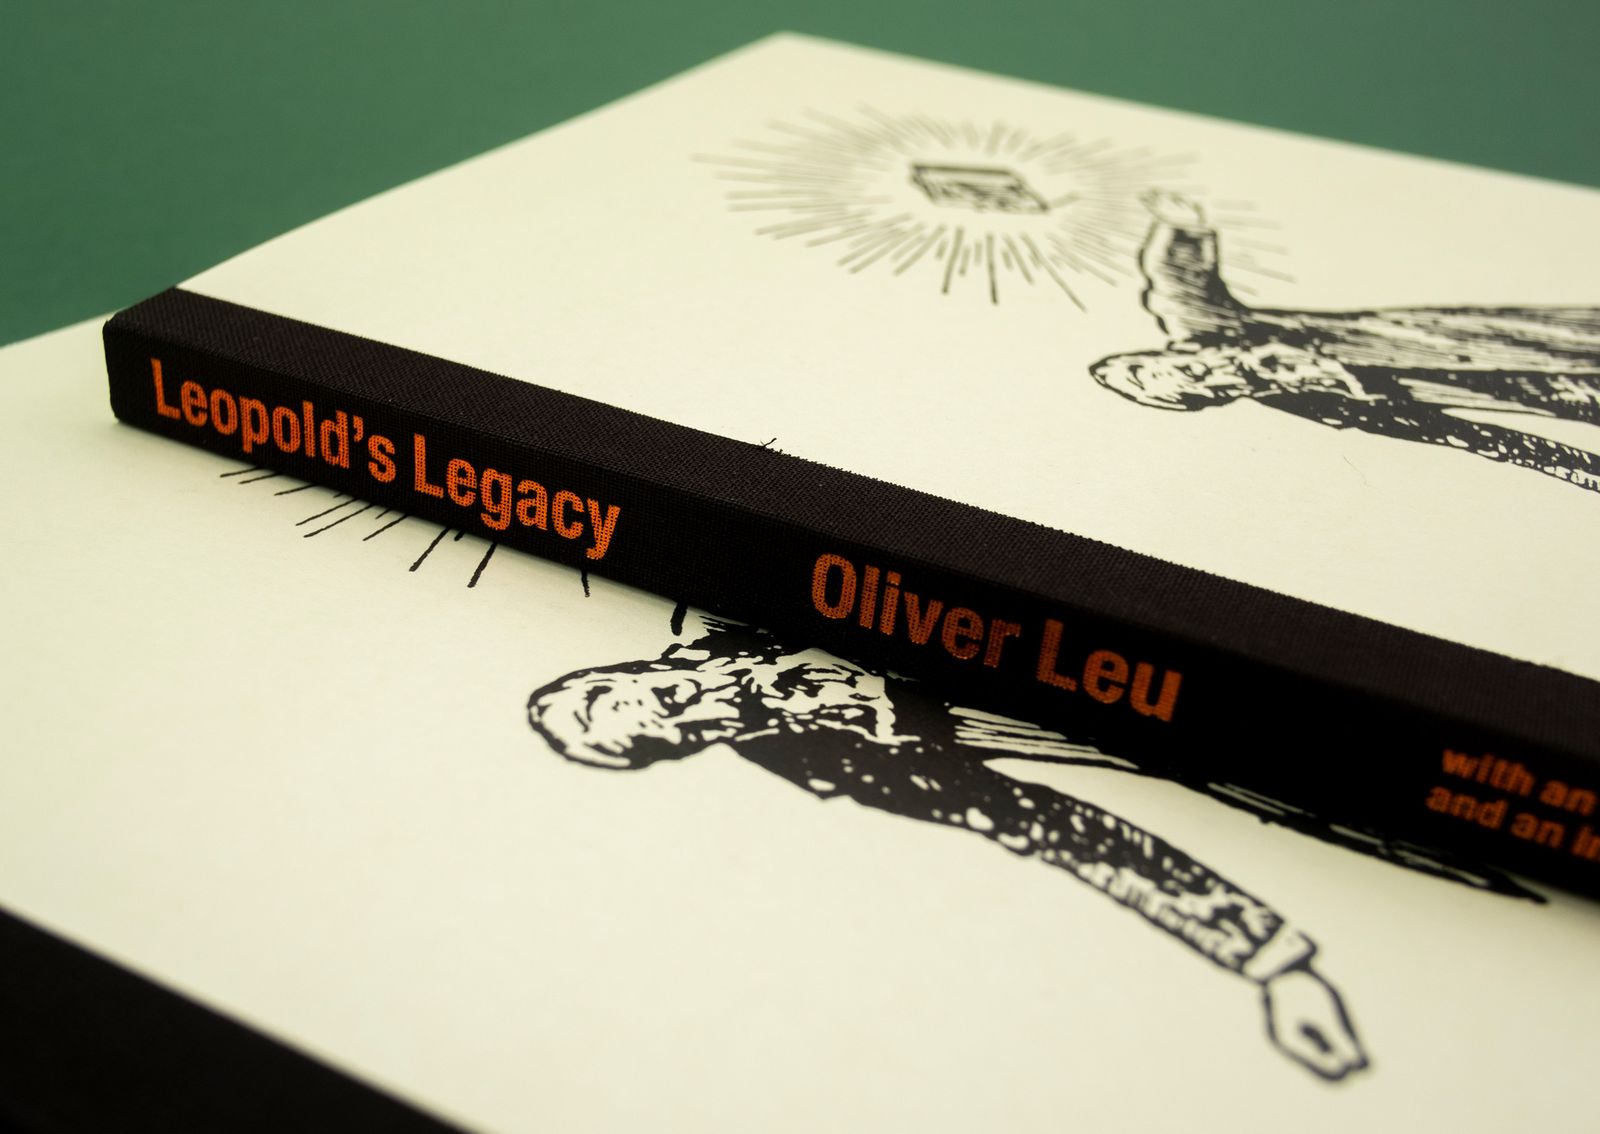 © Oliver Leu, front cover of the book Leopold's Legacy